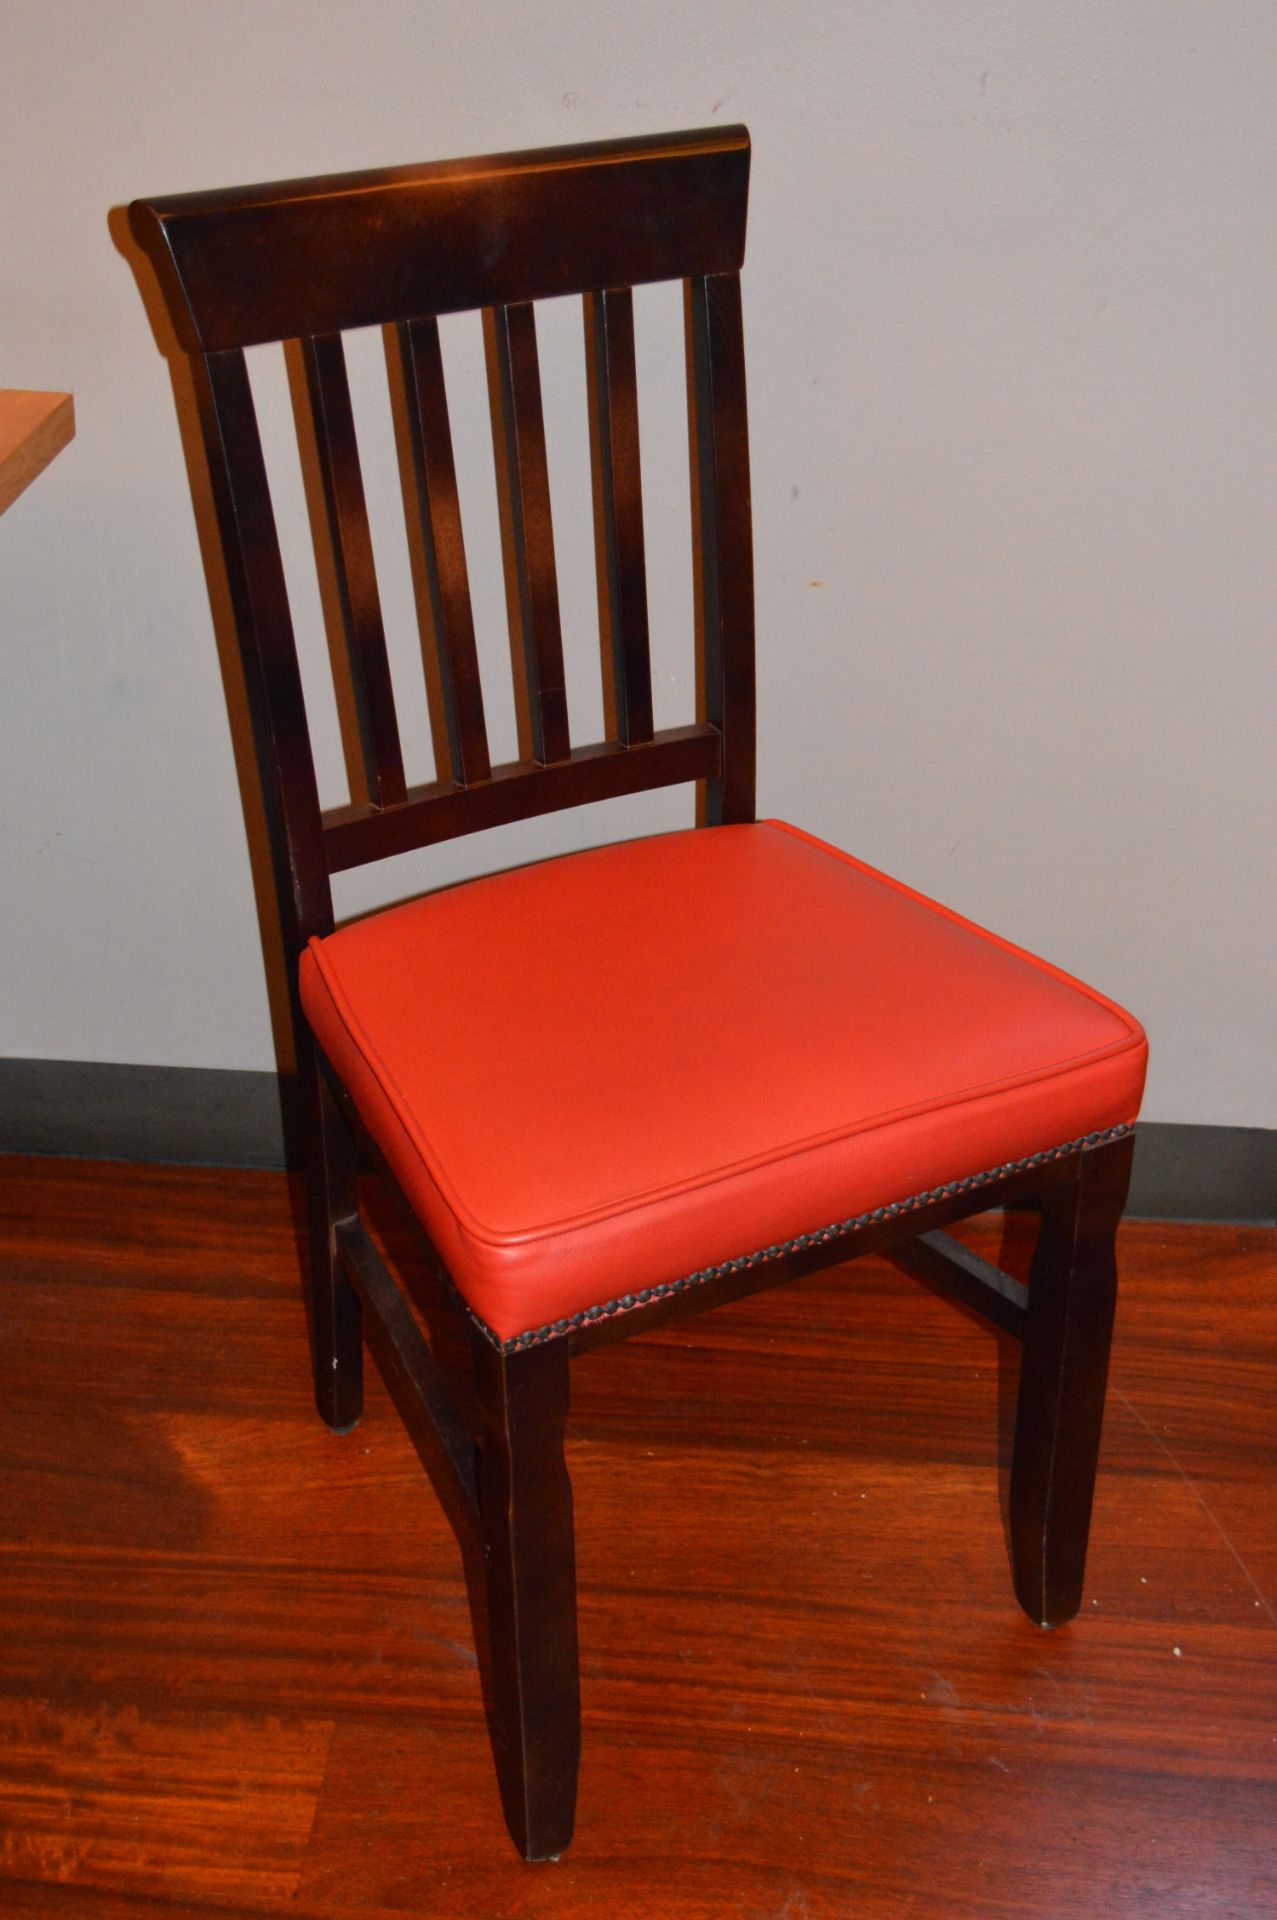 4 x High Back Dining Chairs With Red Leather Seat Cushions and Studded Detail - Hardwoord Frames - - Image 2 of 5